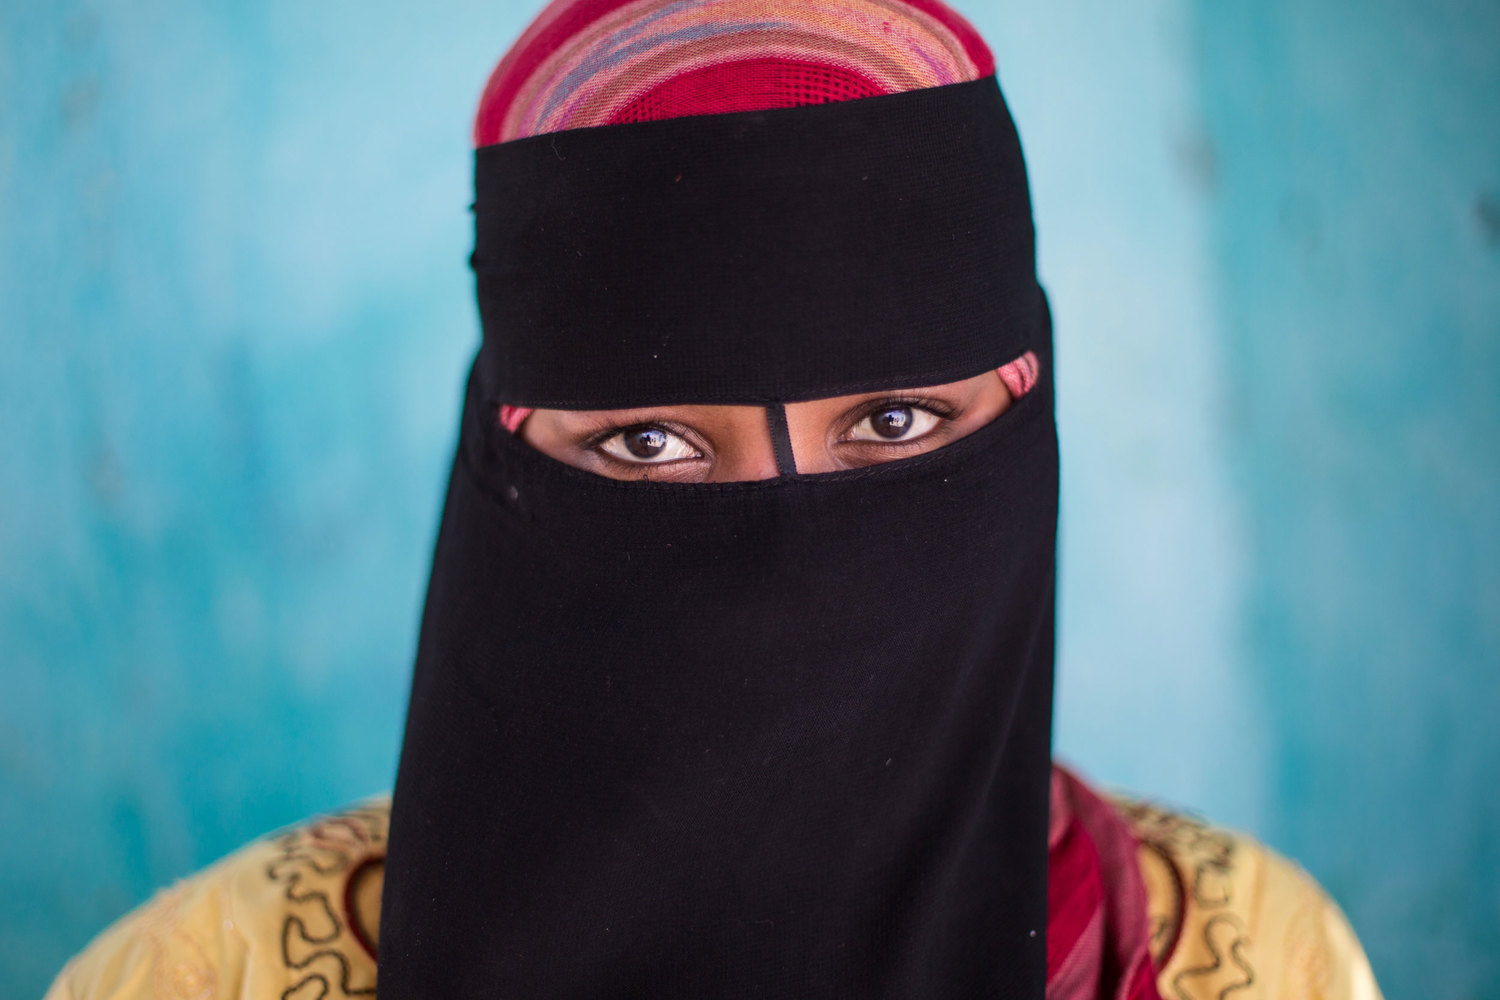  Fawzeya from Heisa Island wears the niqab when she goes out during the day, because she does not want her skin to tan.&nbsp;With Aswan located so close to the equator, it is sunny with summer-like temperatures all year around. 